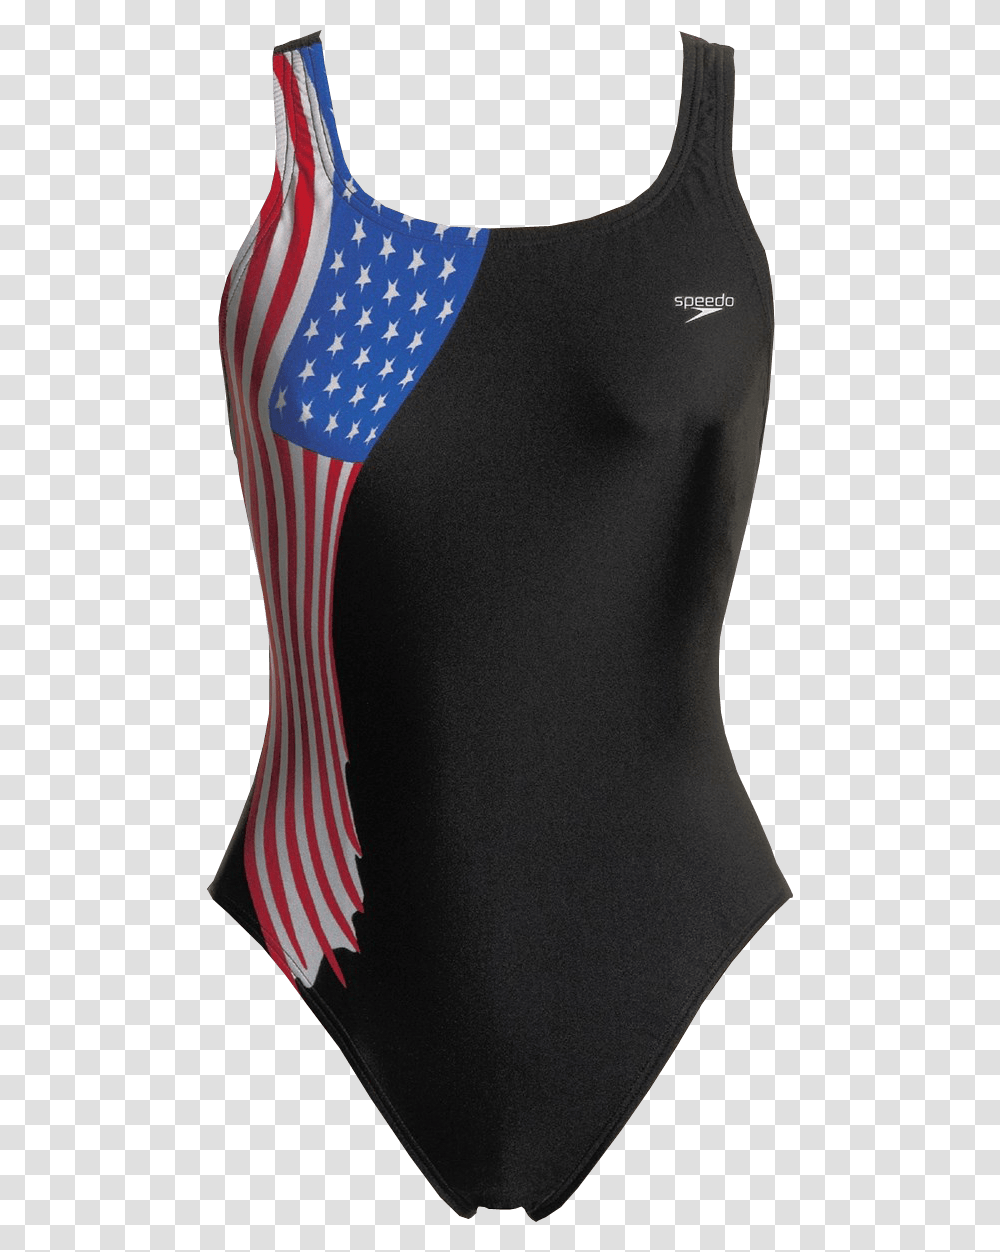 Speedo Usa Swimsuit Background Image Clothing Flag Of The United States, Pants, Underwear, Hip, Tights Transparent Png